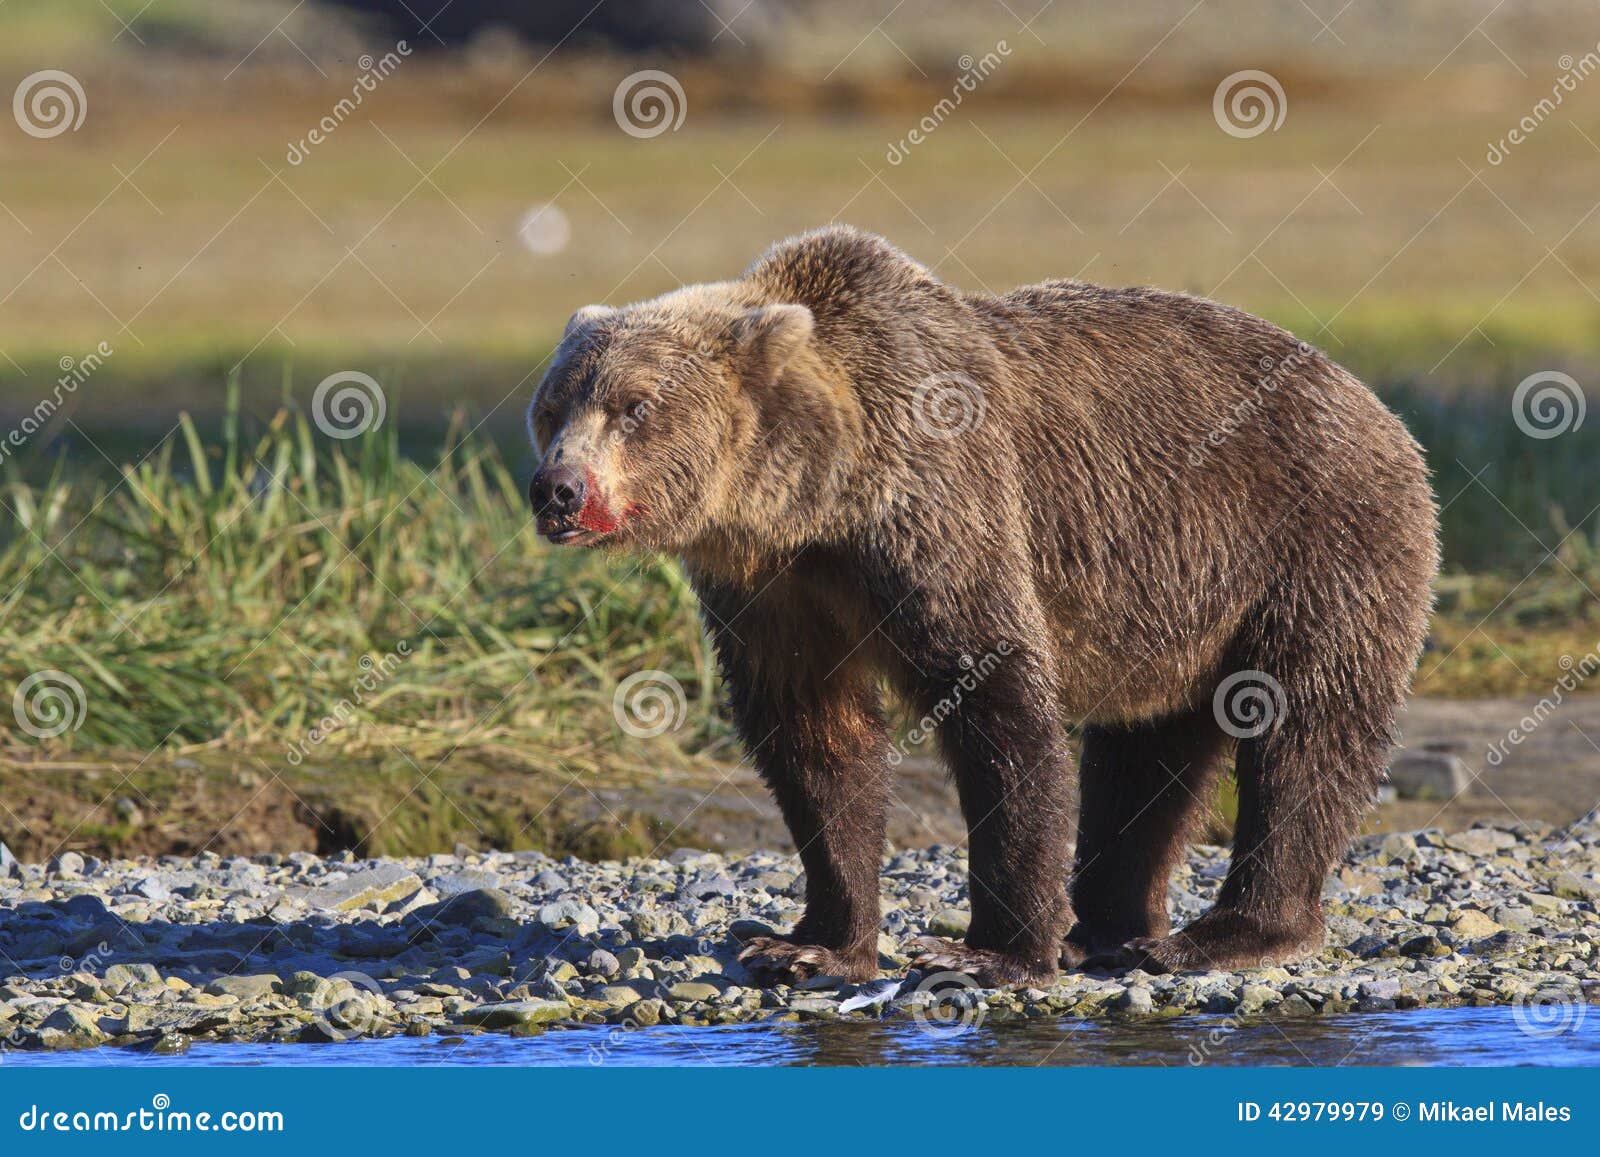 brown bear boar with bloody snout